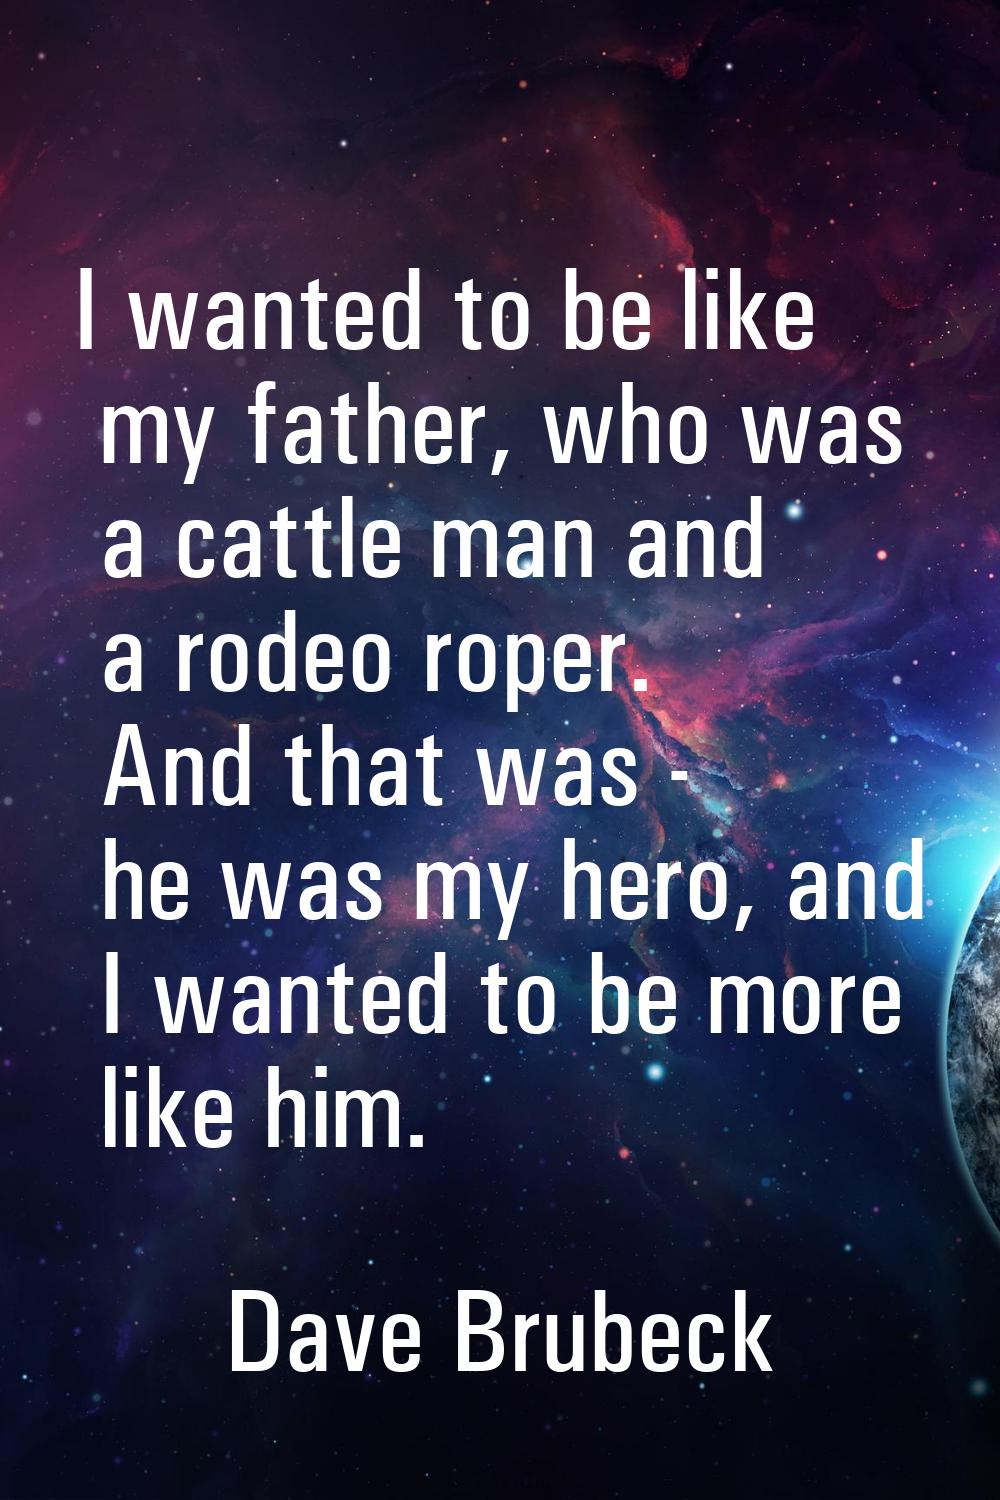 I wanted to be like my father, who was a cattle man and a rodeo roper. And that was - he was my her